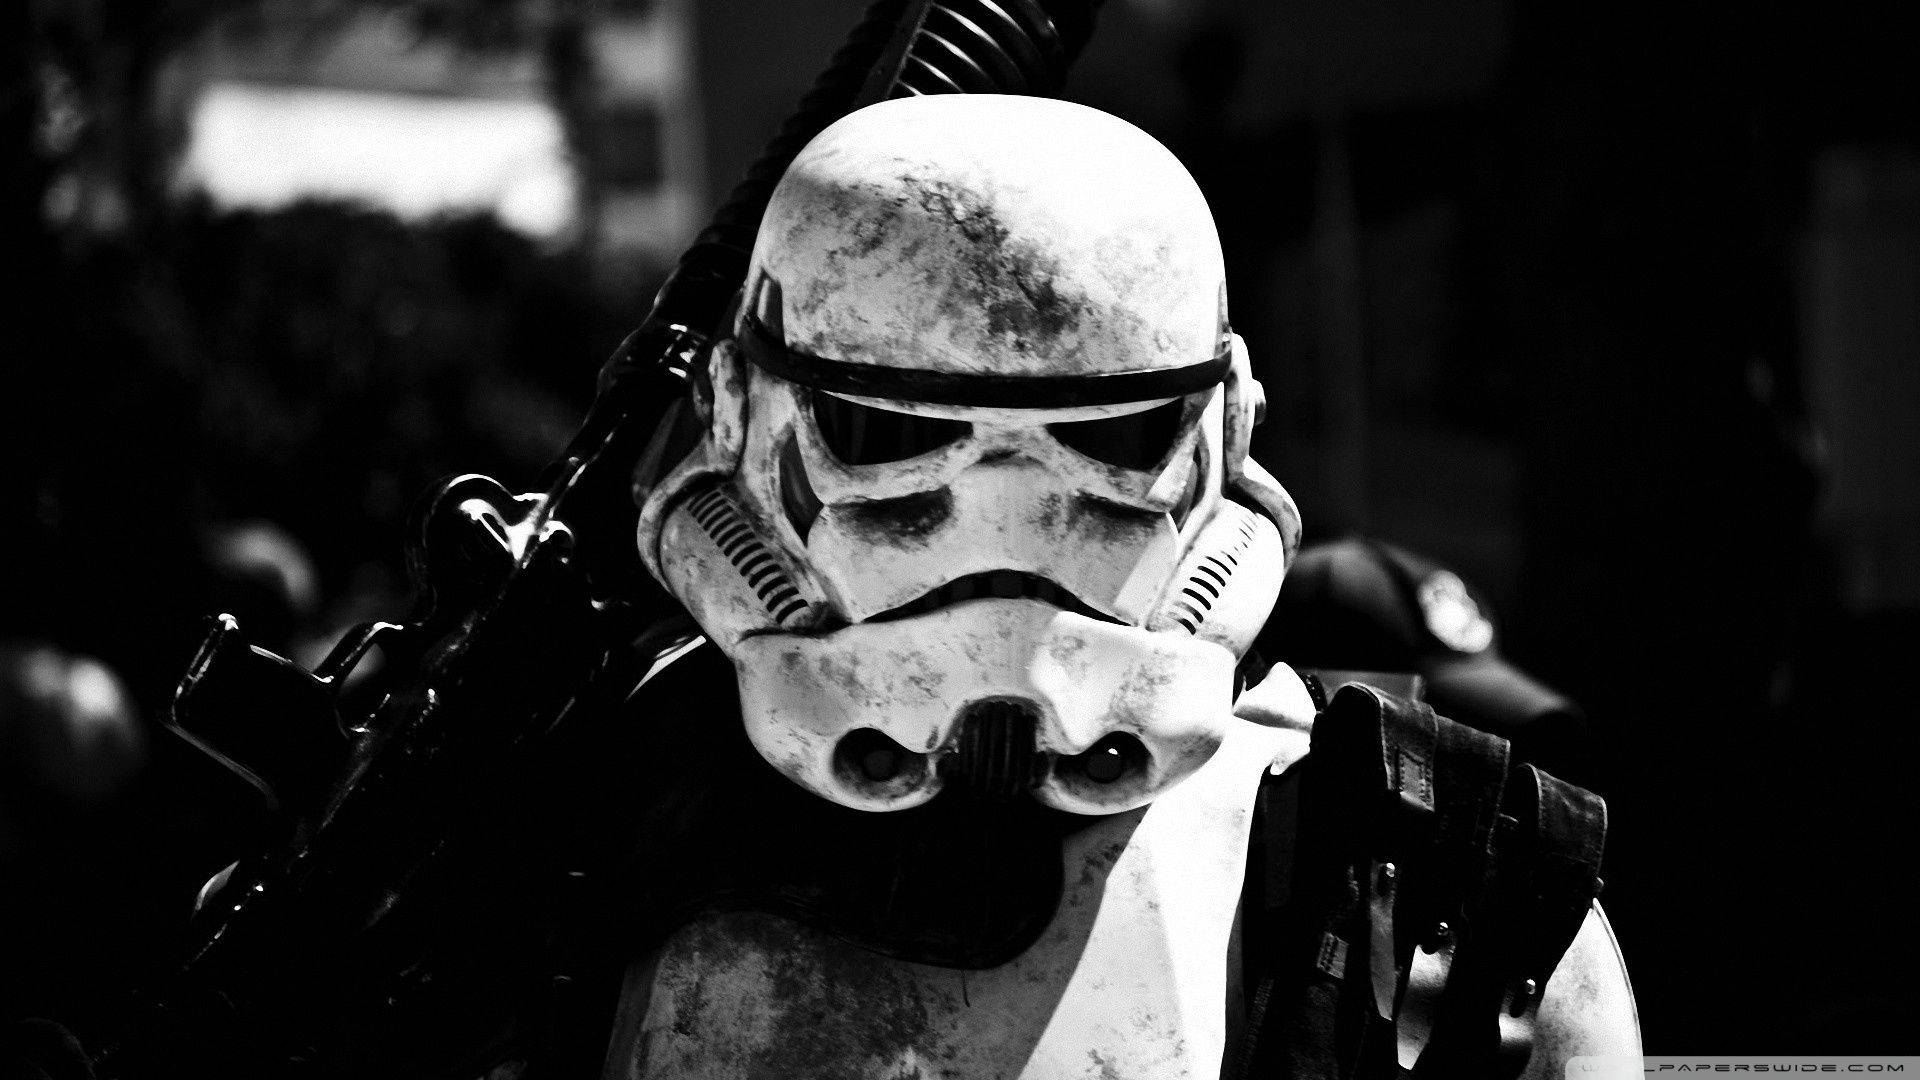 1920X1080 Stormtrooper Wallpaper and Background